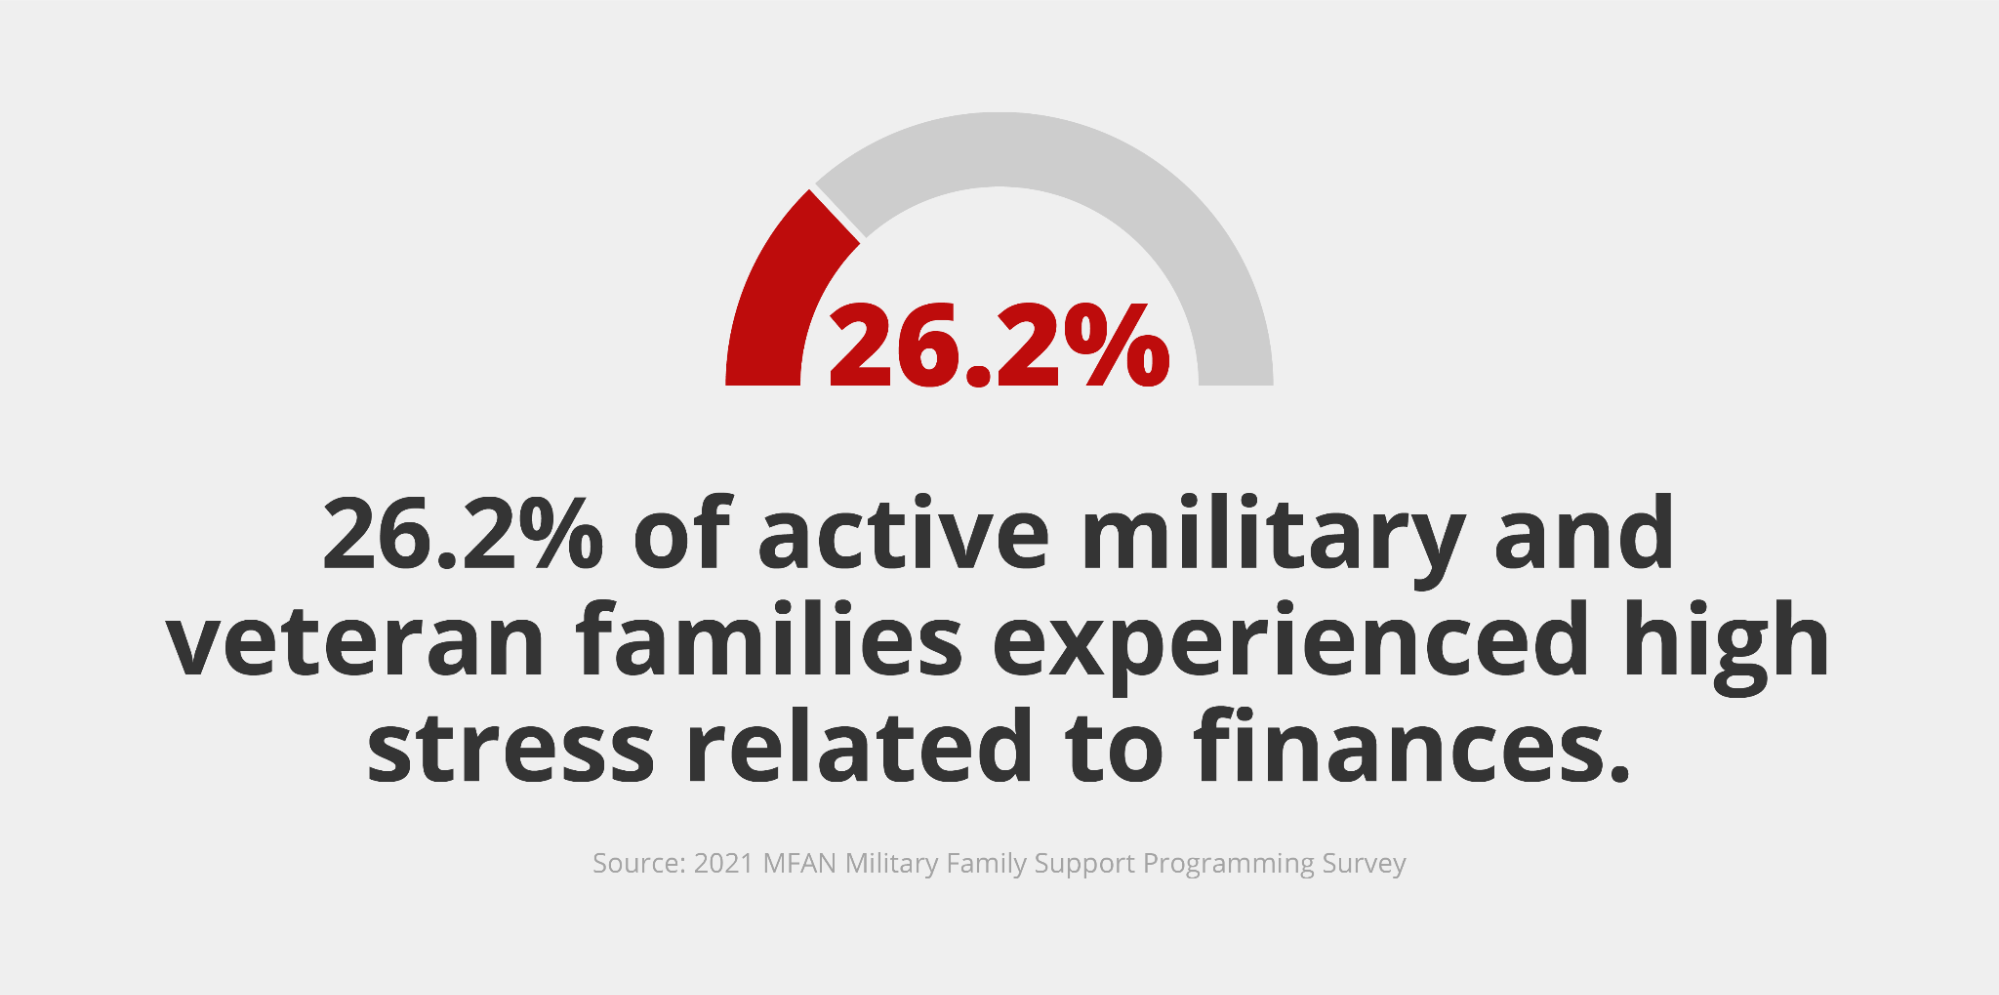 Graphic featuring a meter filled to 26.2% with text that reads, “26.2% of active military and veteran families experienced high stress related to finances. Source: 2021 MFAN Military Family Support Programming Survey”.